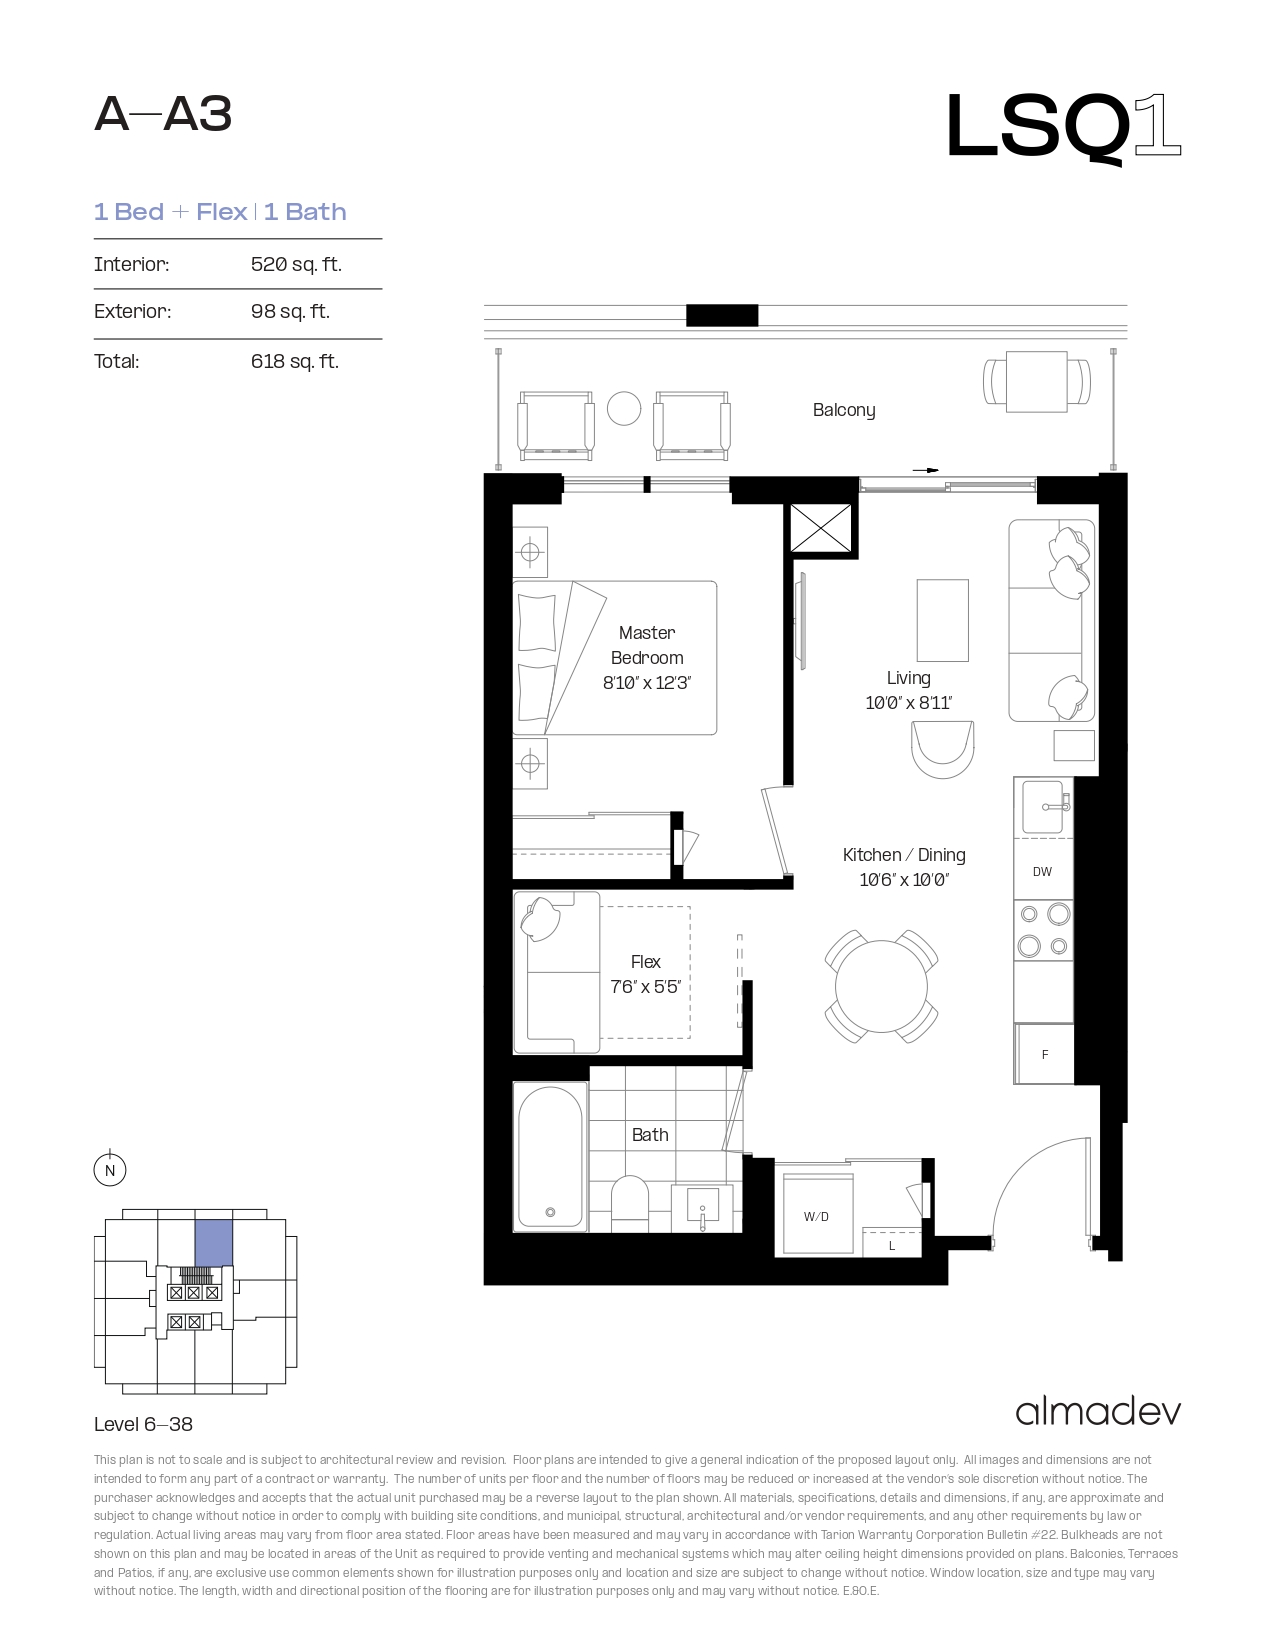 A-A3 Floor Plan of LSQ Condos with undefined beds